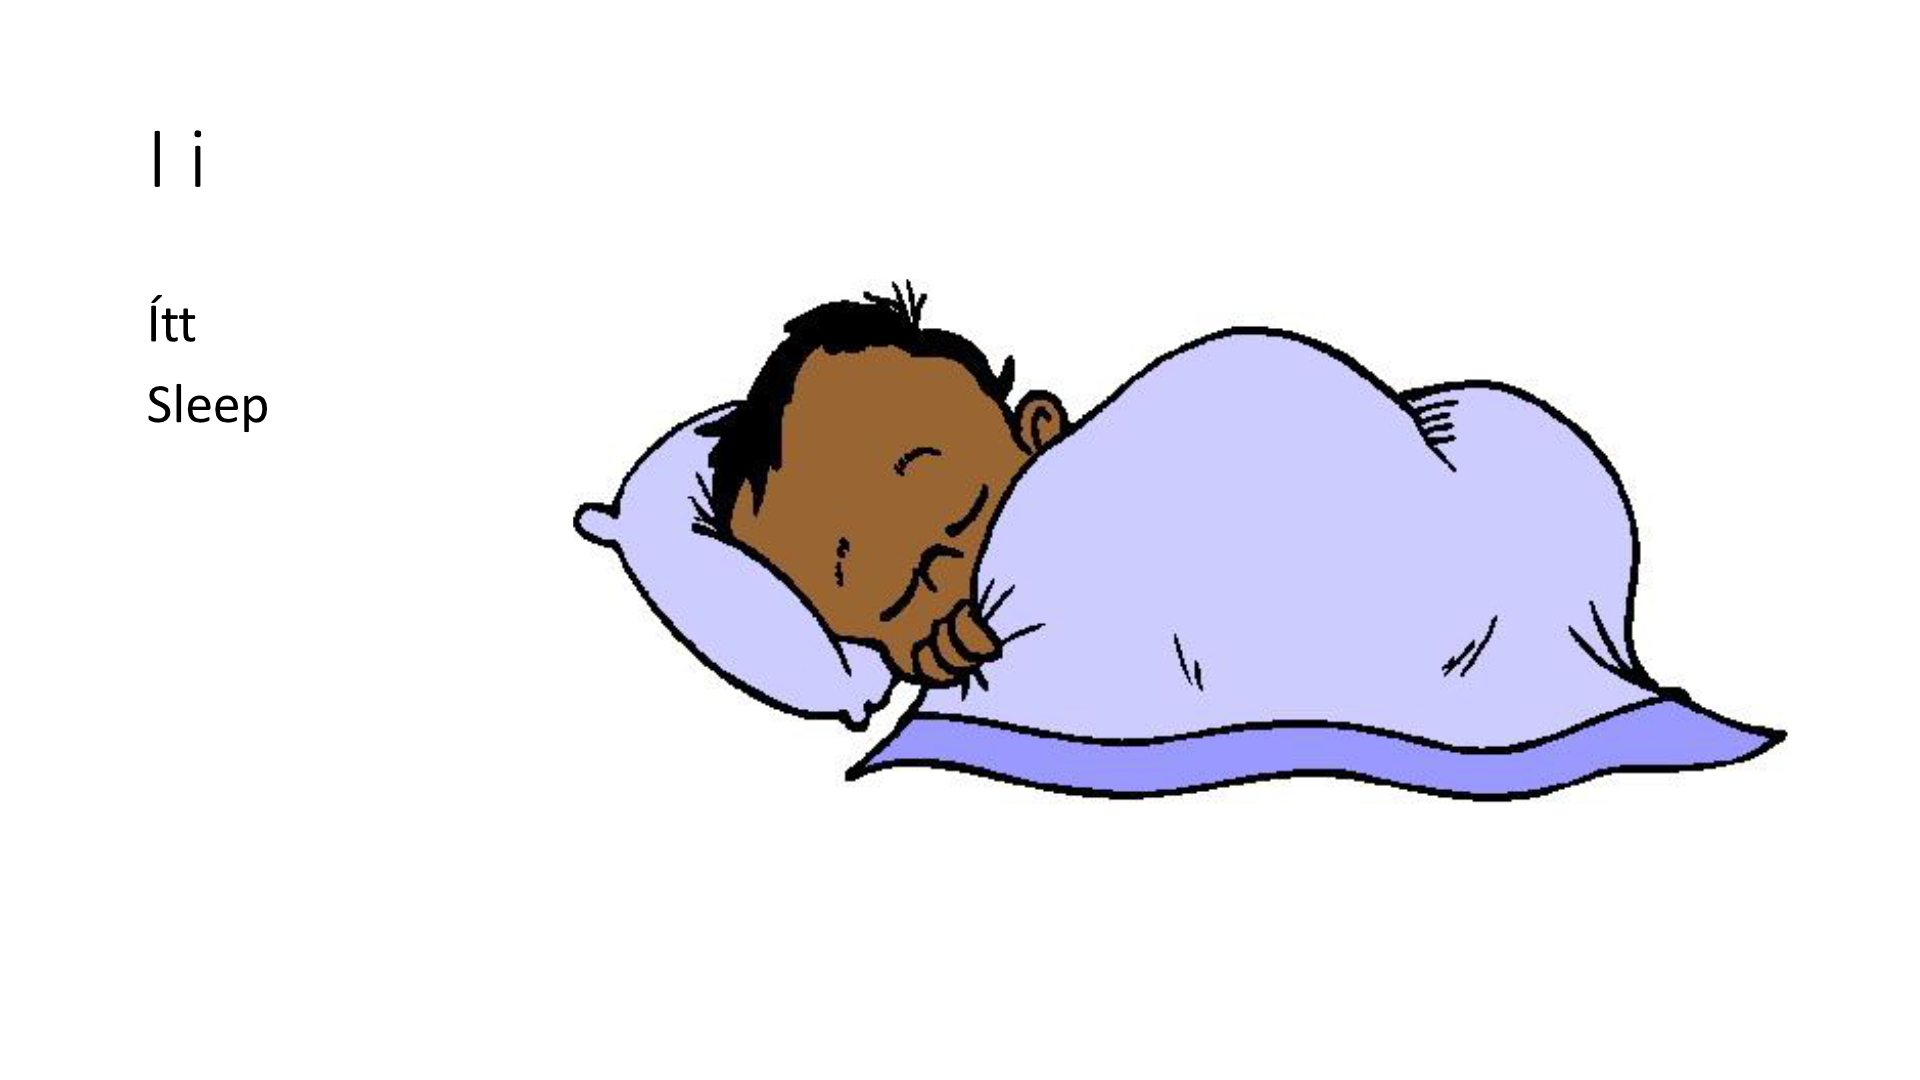 Illustration of a sleeping baby.